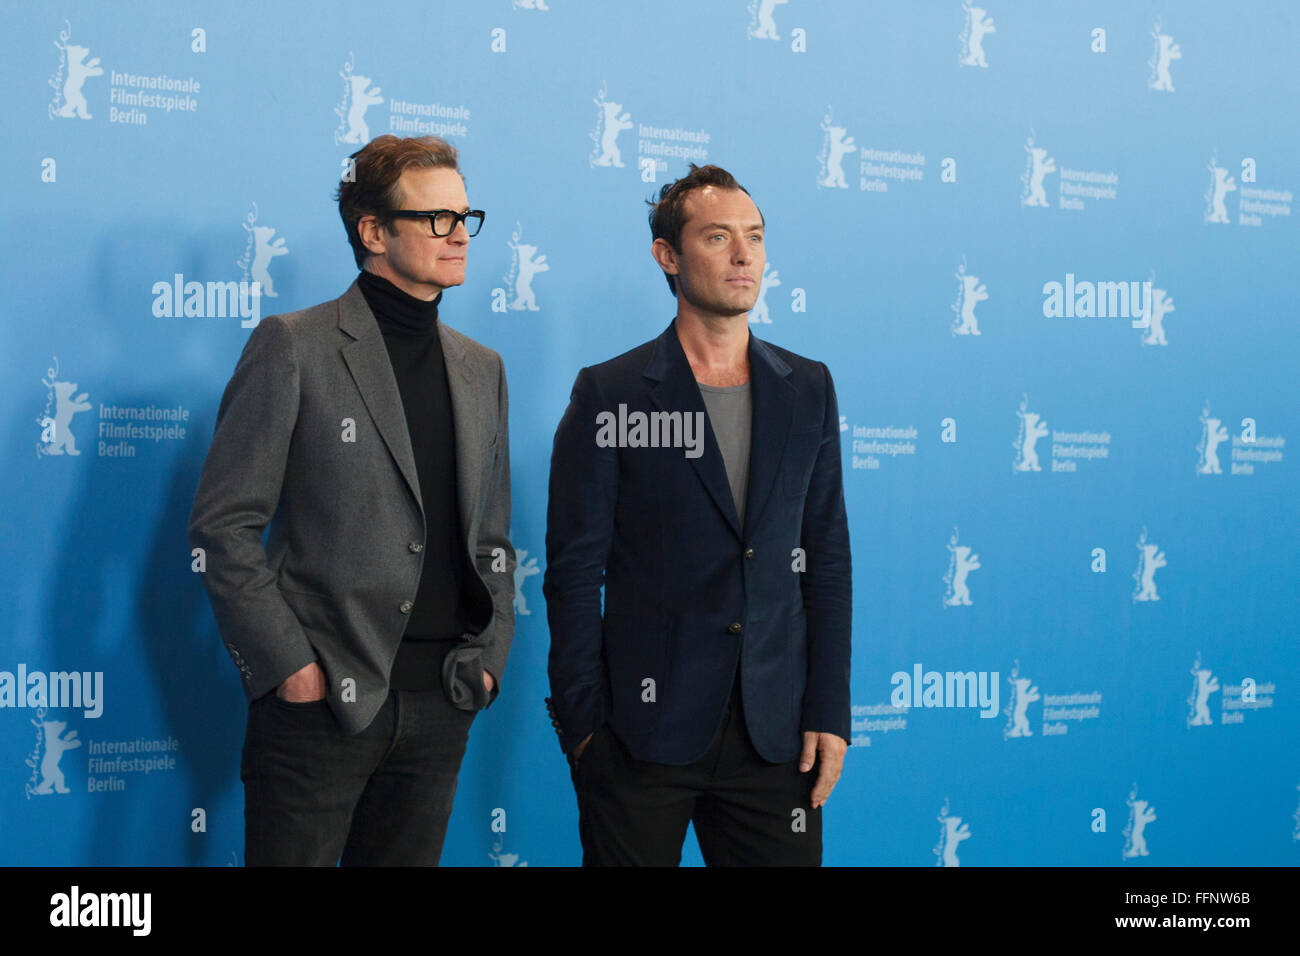 Berlin, Germany. 16th February, 2016. Actors Colin Firth and Jude Law attend the 'Genius' photo call during the 66th Berlinale International Film Festival Berlin Credit:  Odeta Catana/Alamy Live News Stock Photo